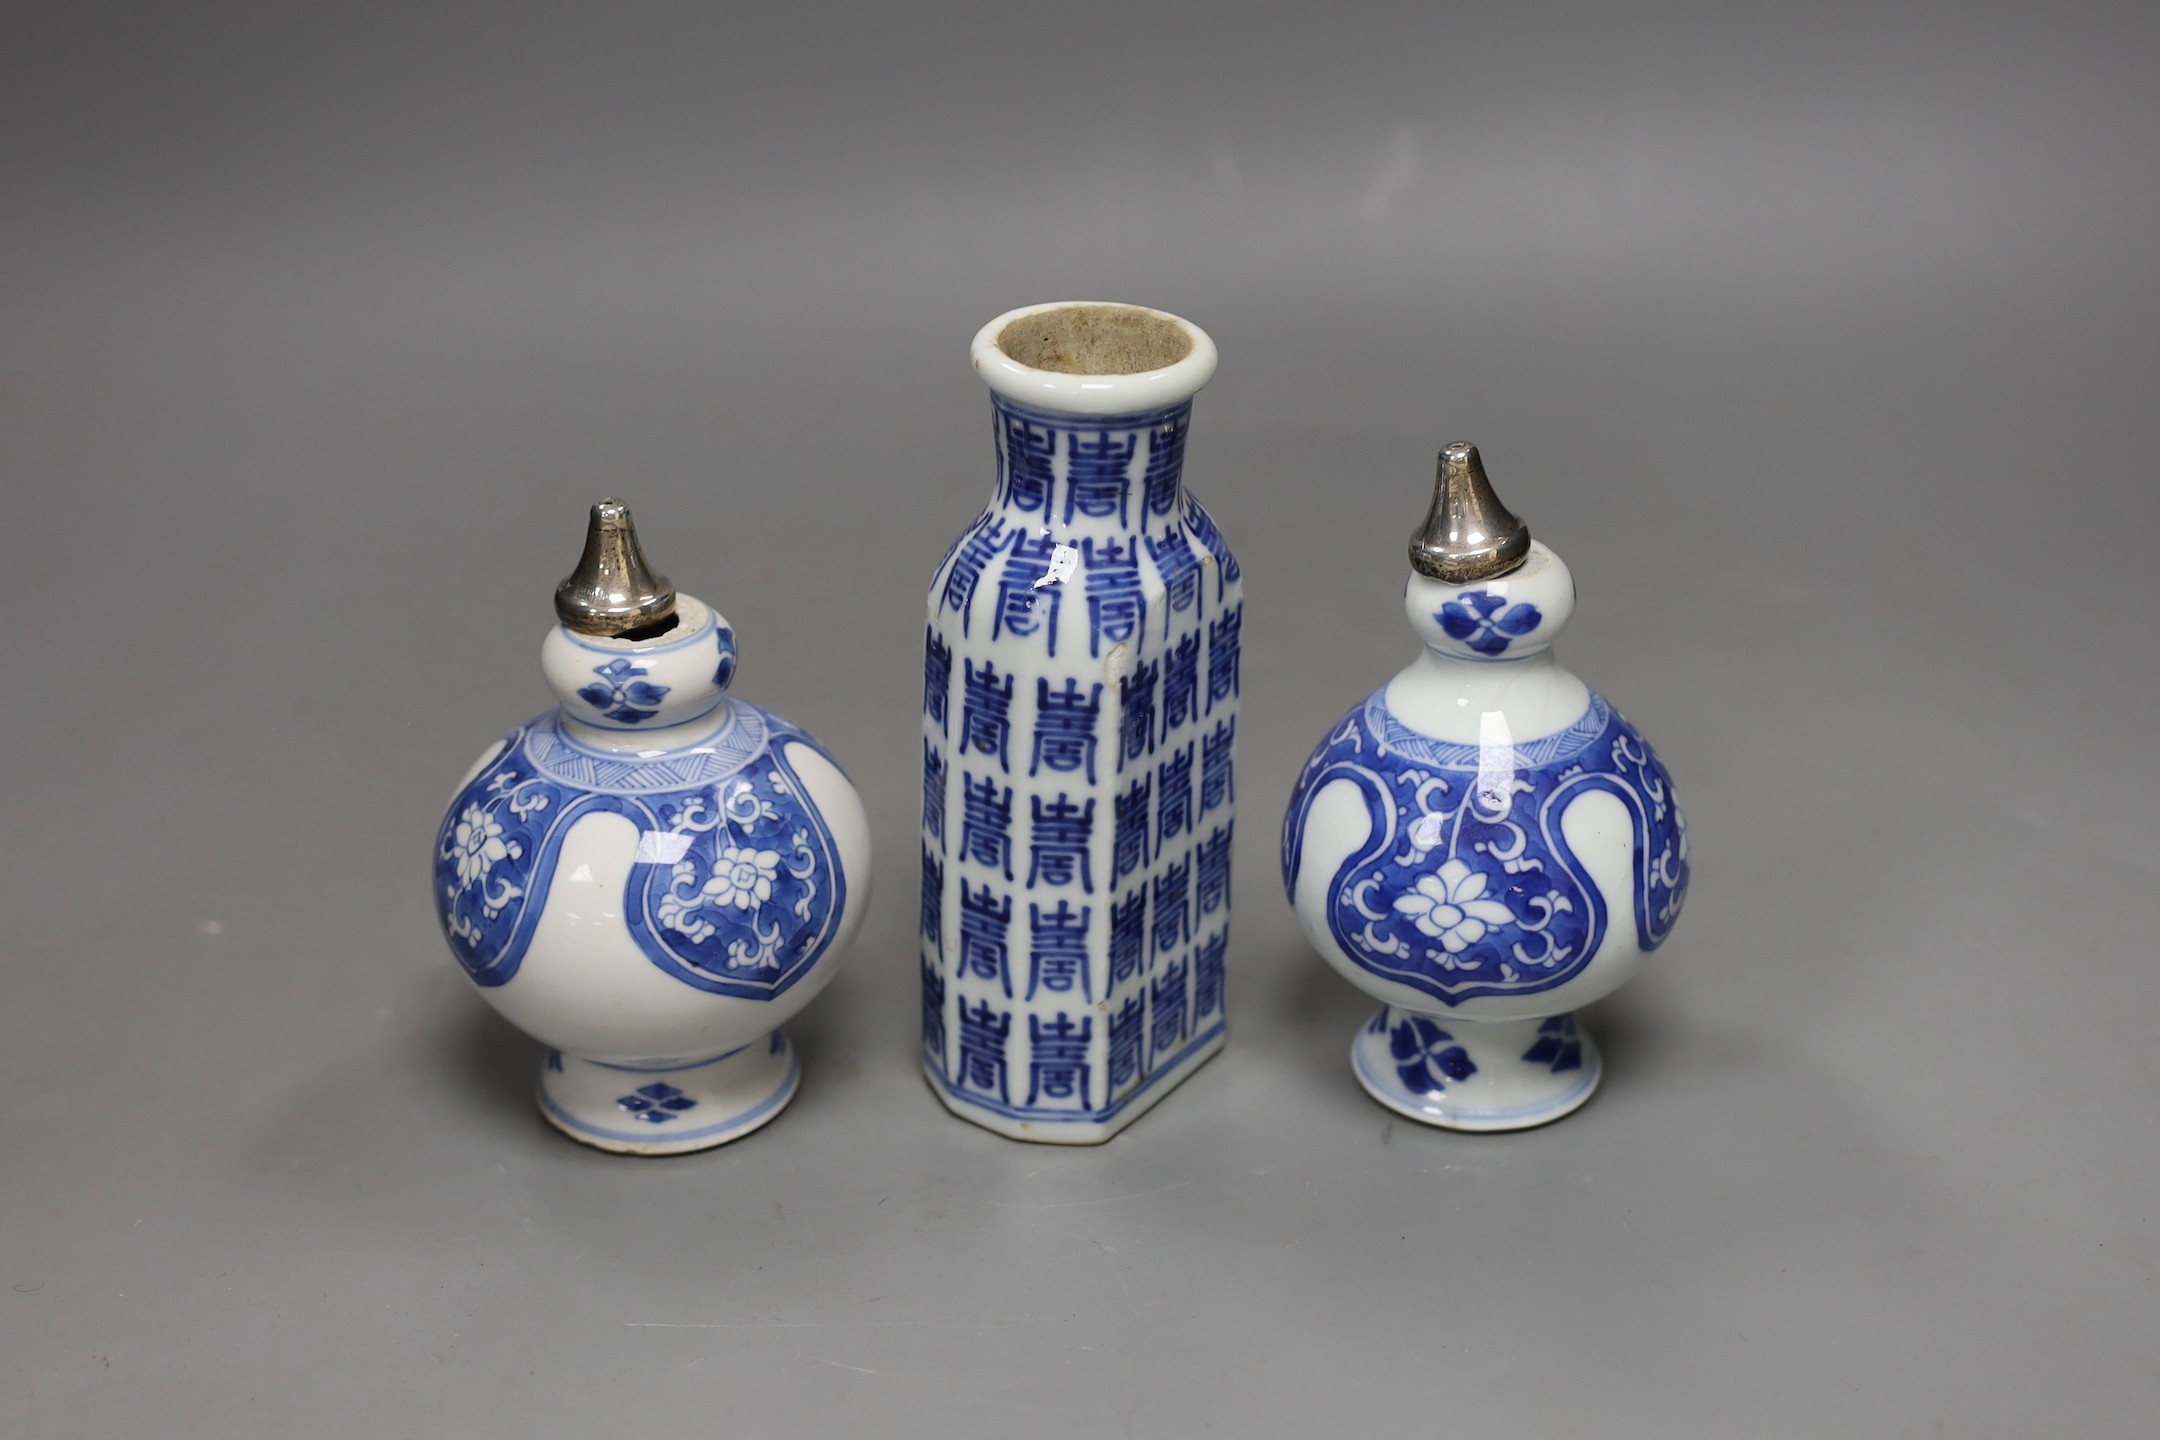 A pair of Chinese Kangxi blue and white rose water sprinklers (cut down) and an unusual 19th century Chinese blue and white ‘Hundred Shou’ jar, rose sprinklers: 10cms high excluding metal tops